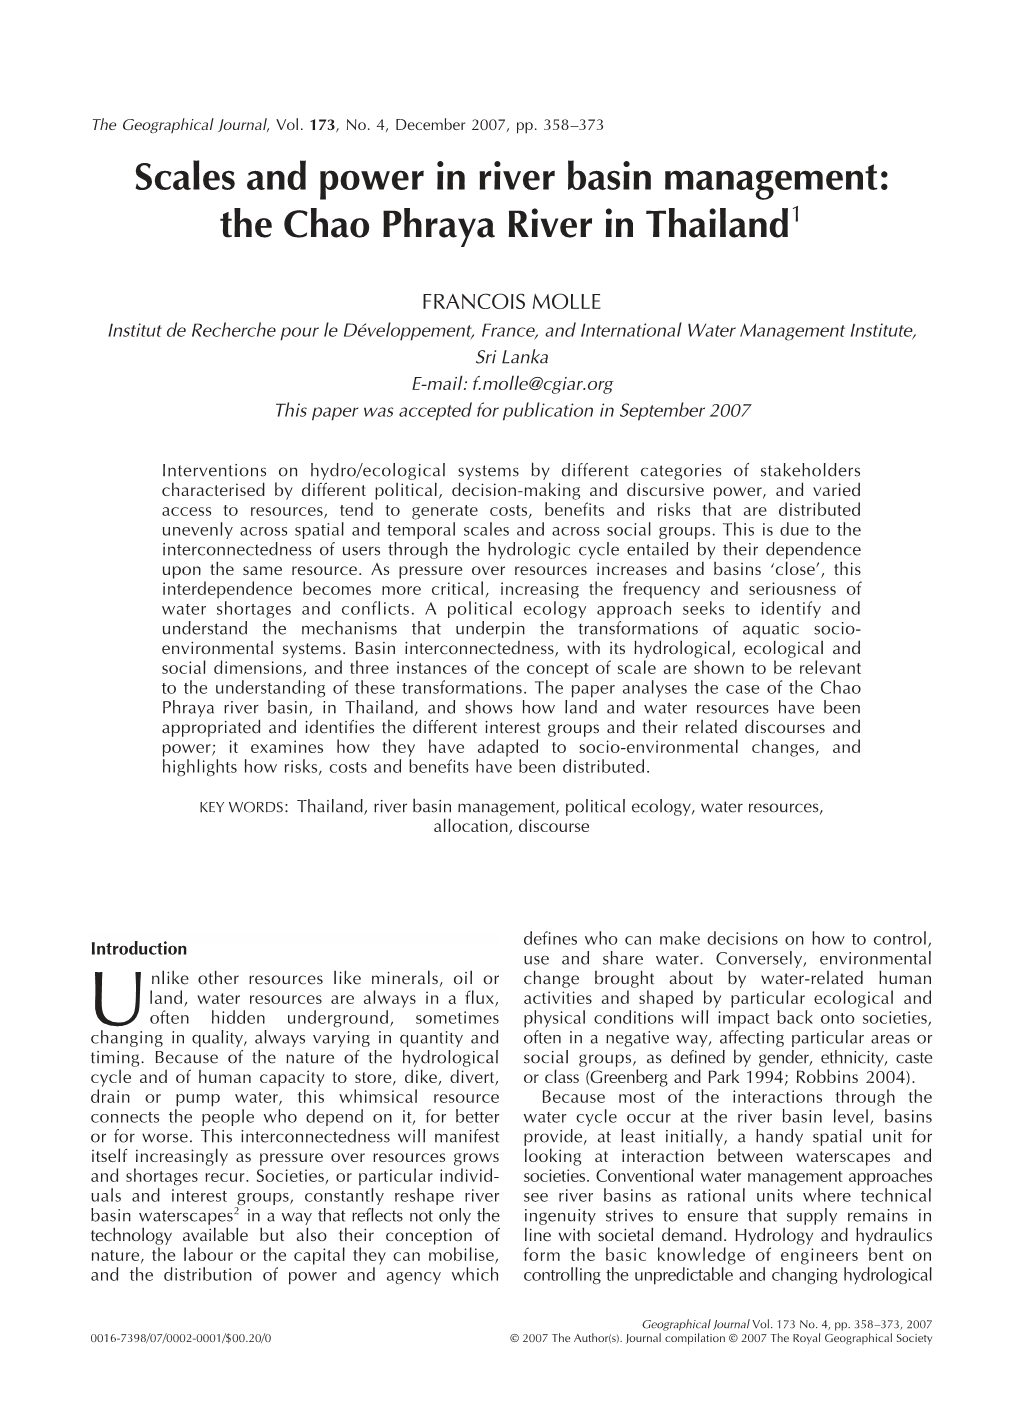 The Chao Phraya River in Thailand1